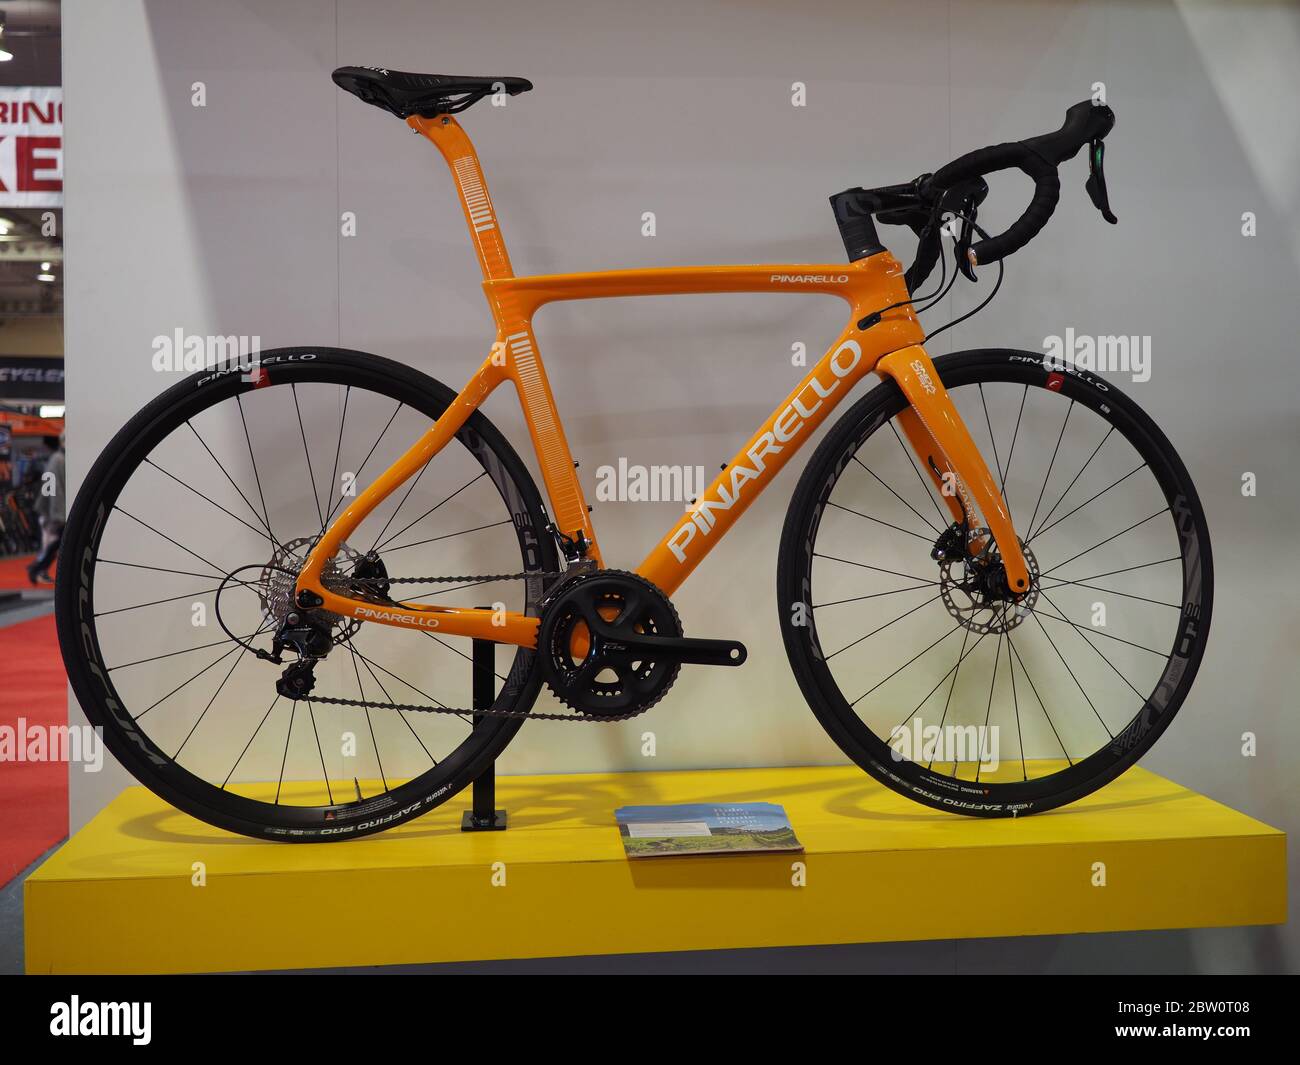 TORONTO - MARCH 1, 2019: Cycling is an increasingly popular form of exercise and bicycle shows offering high end bikes such as this carbon fiber model Stock Photo